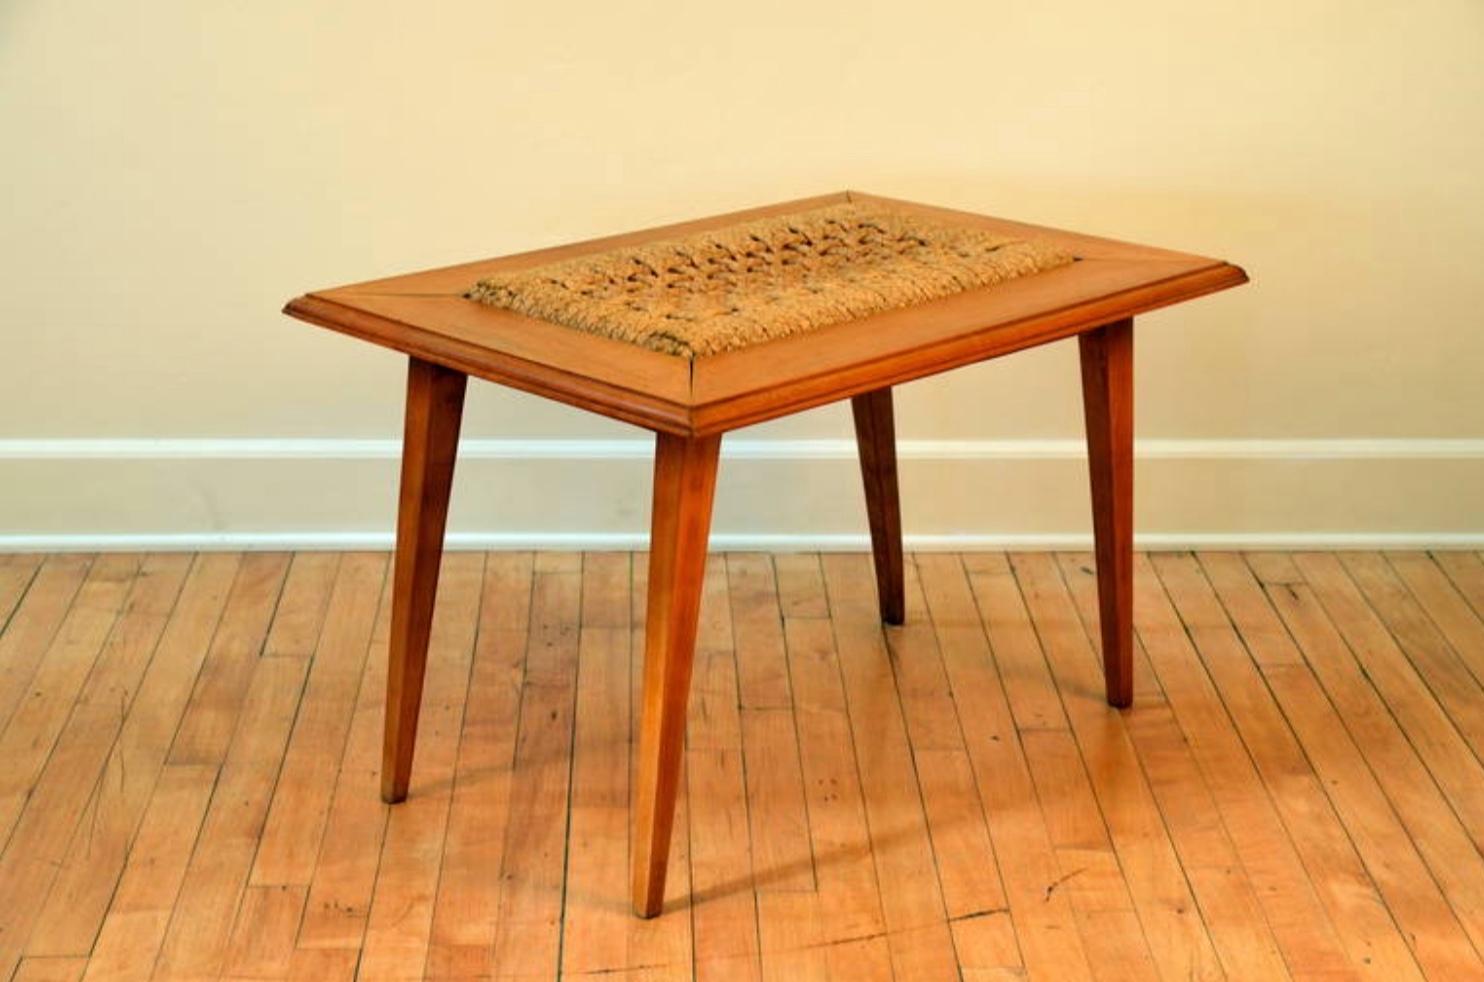 Rare Oak and Rope Side Table by Adrien Audoux and Frida Minet In Good Condition For Sale In Los Angeles, CA